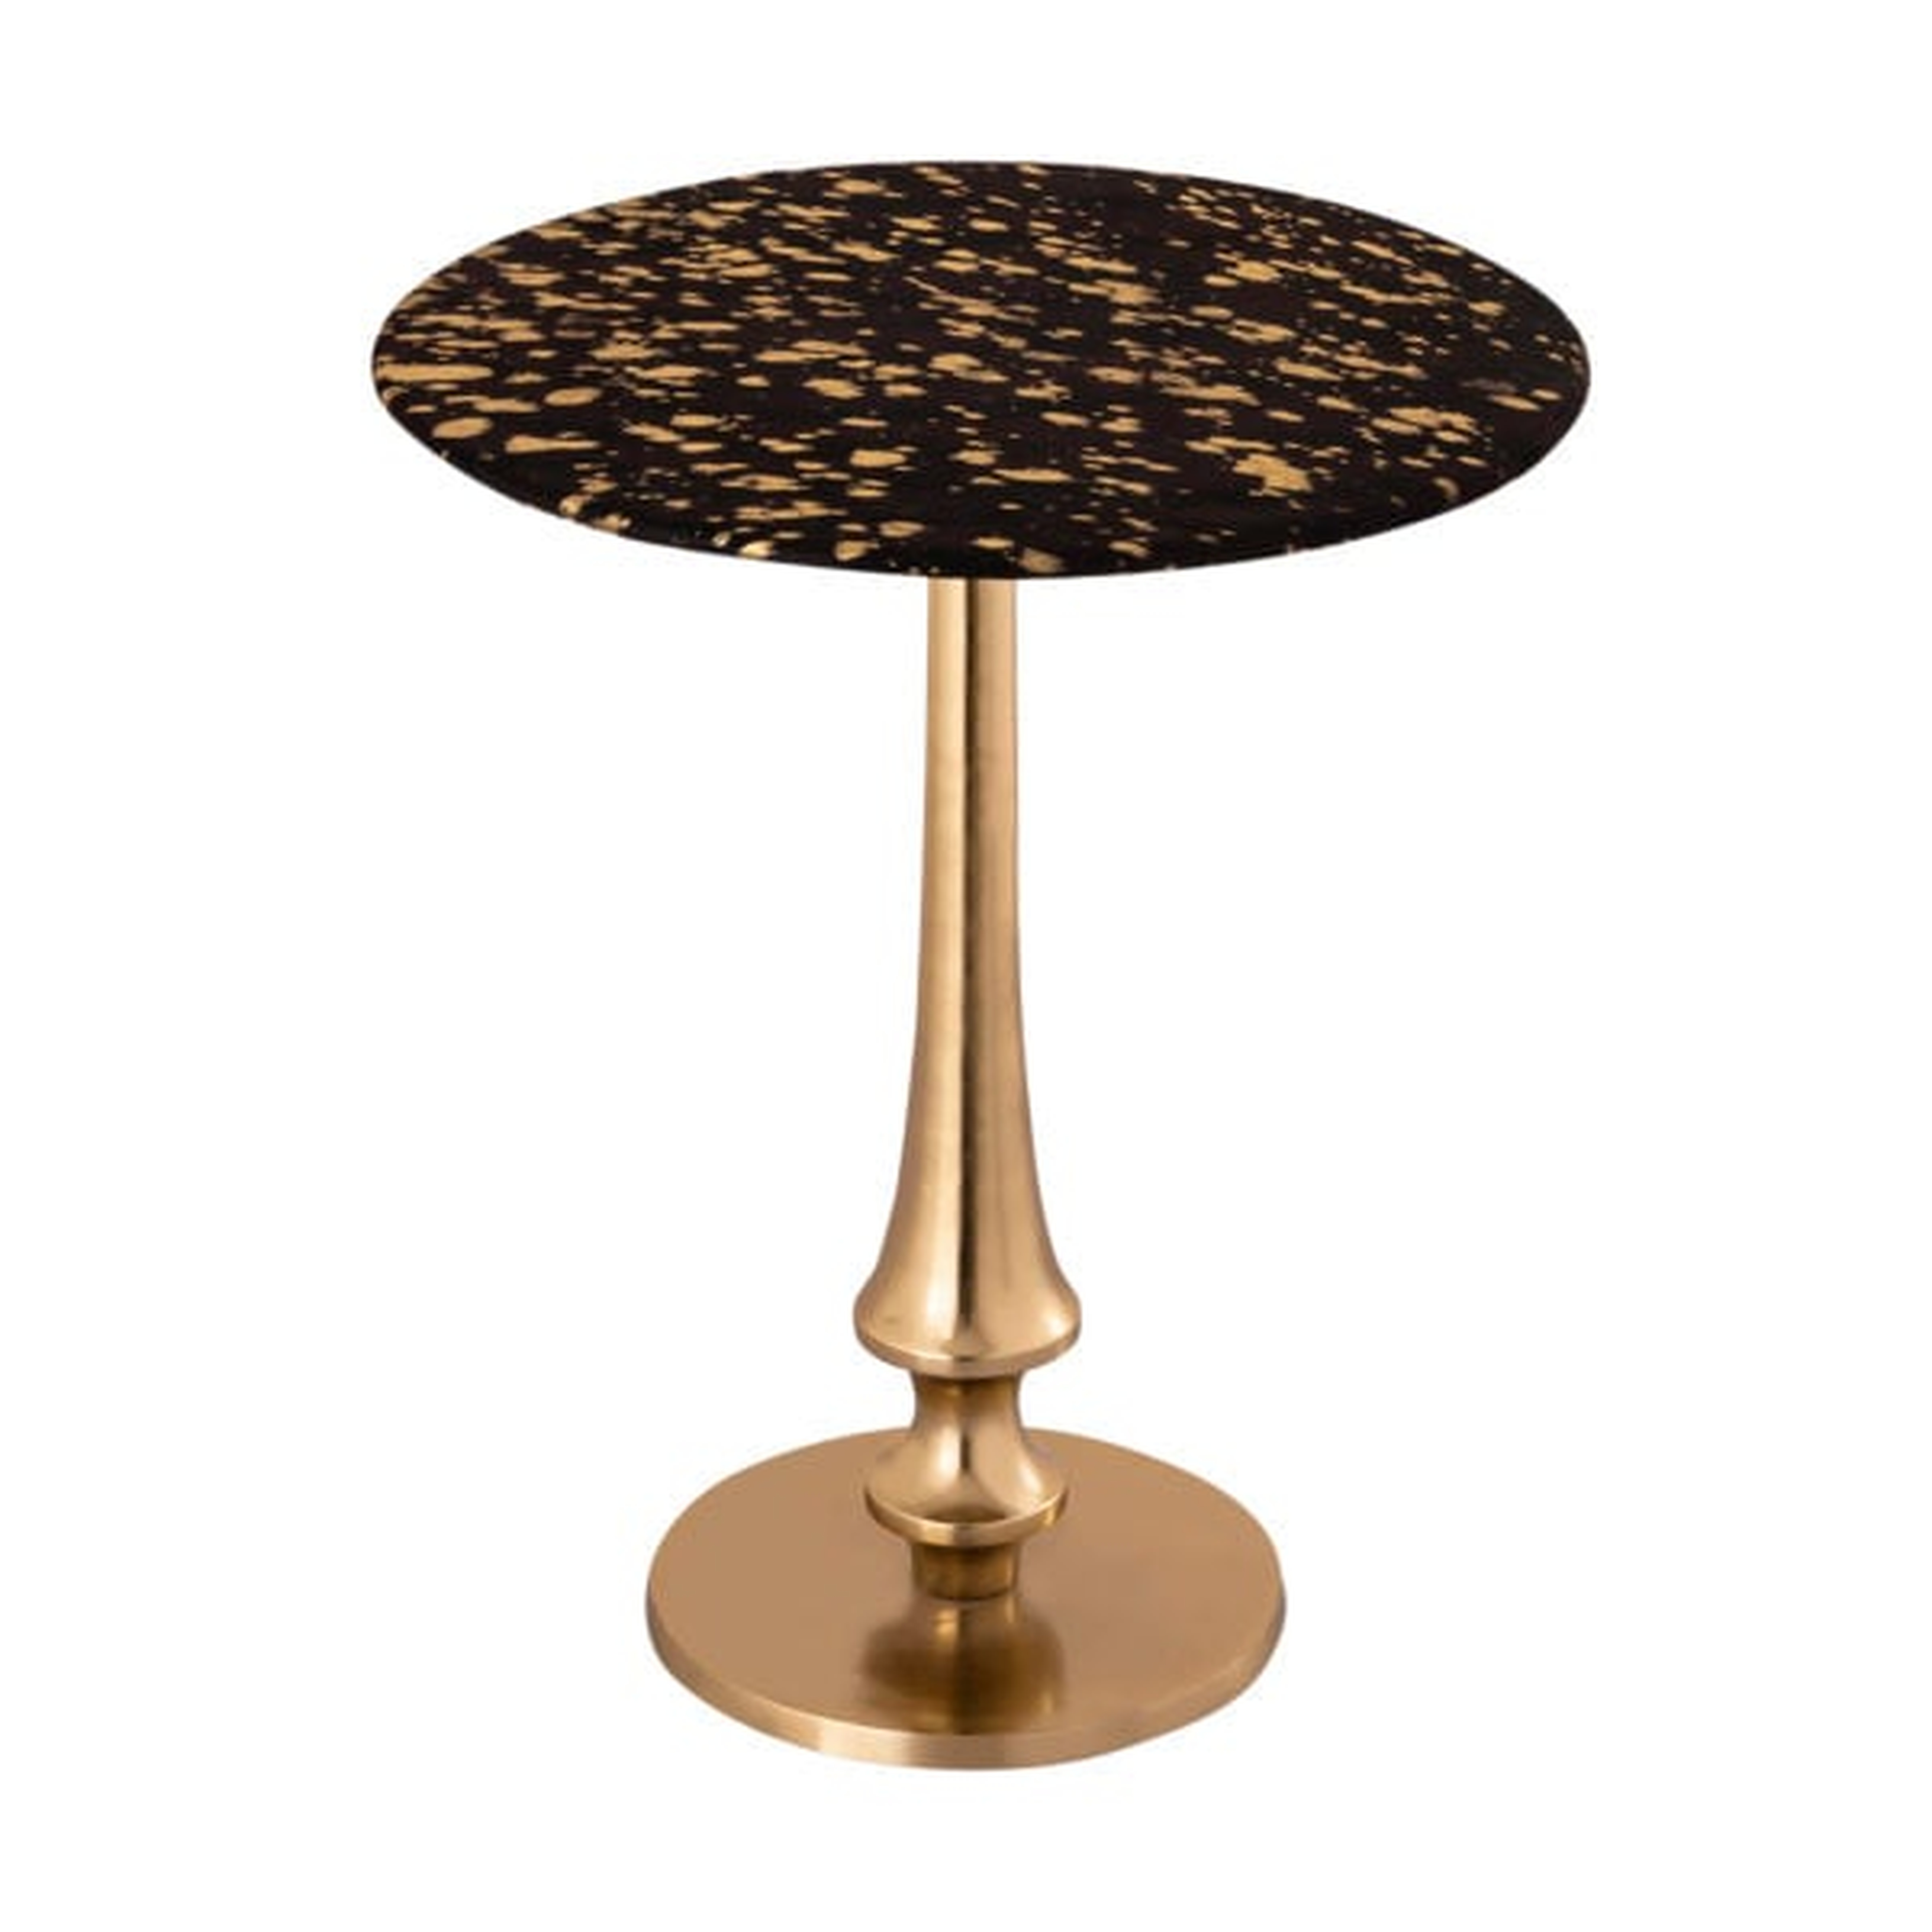 Lilly GOATHIDE SIDE TABLE - Maren Home